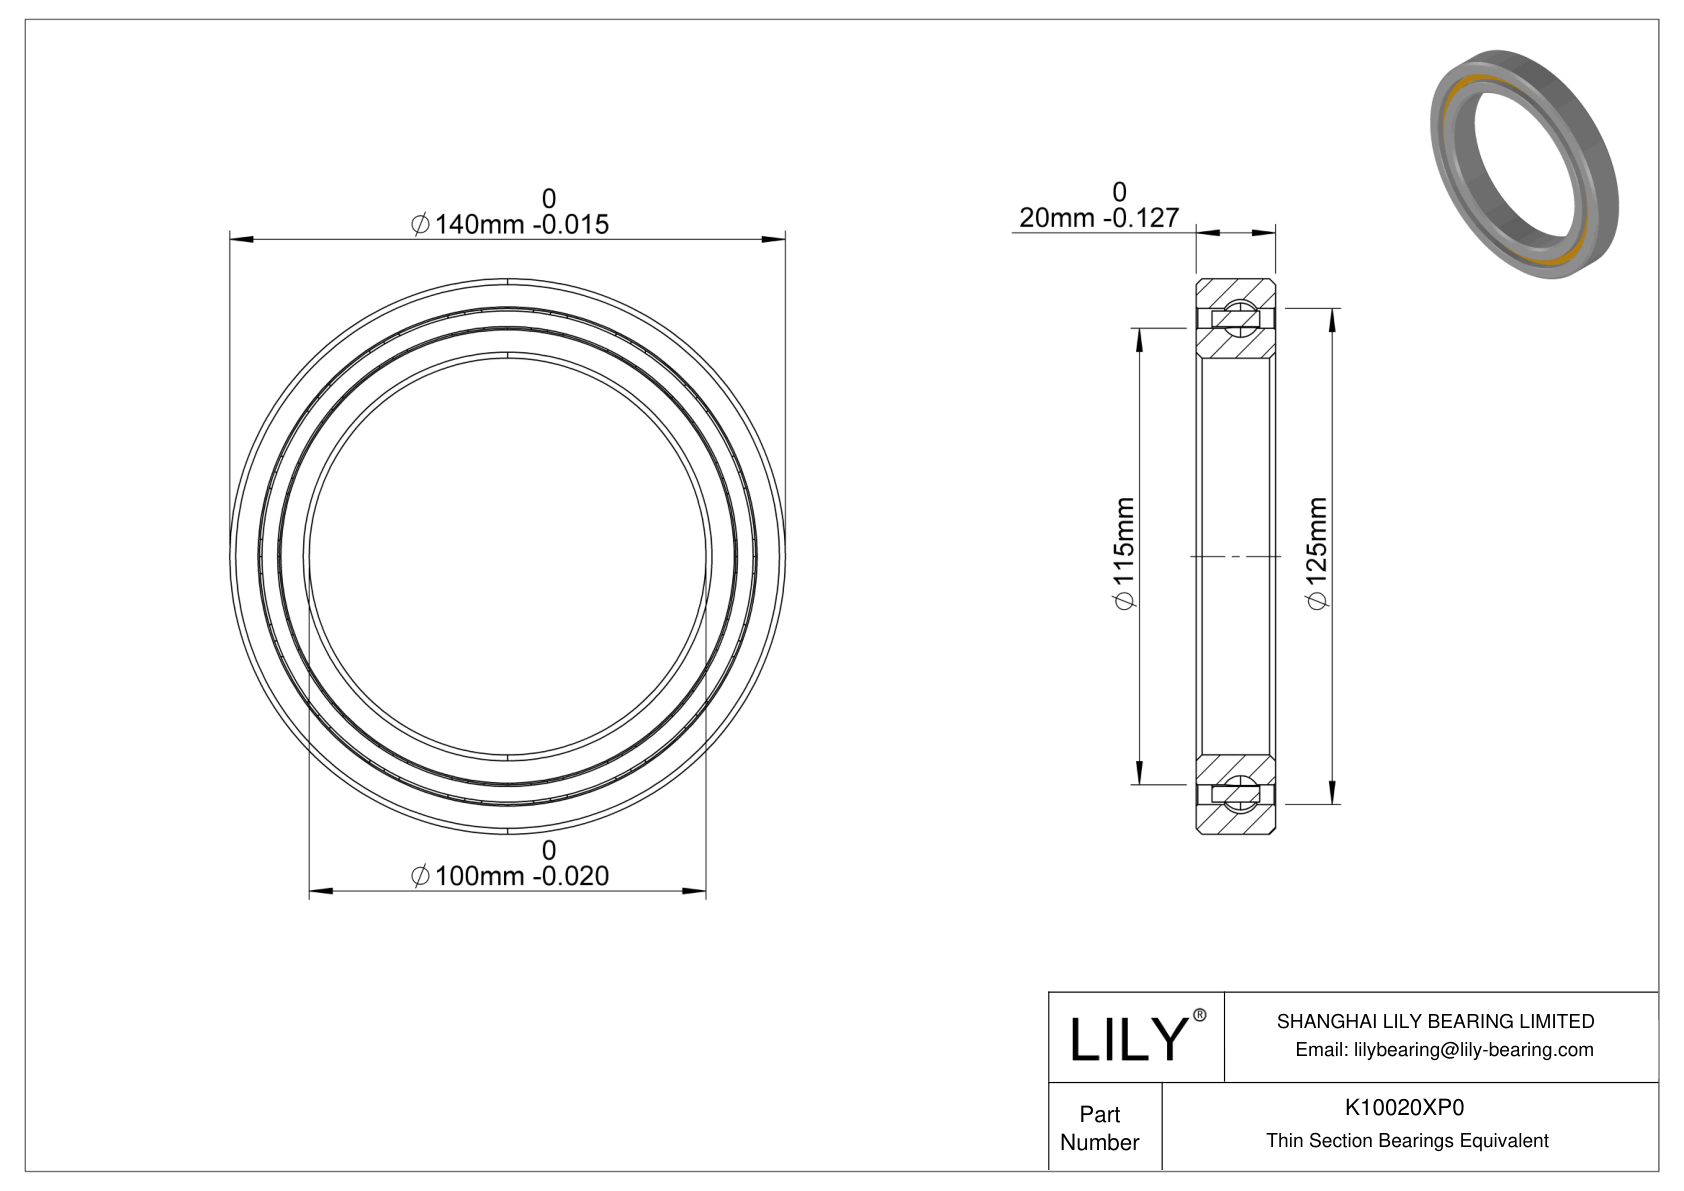 K10020XP0 Constant Section (CS) Bearings cad drawing